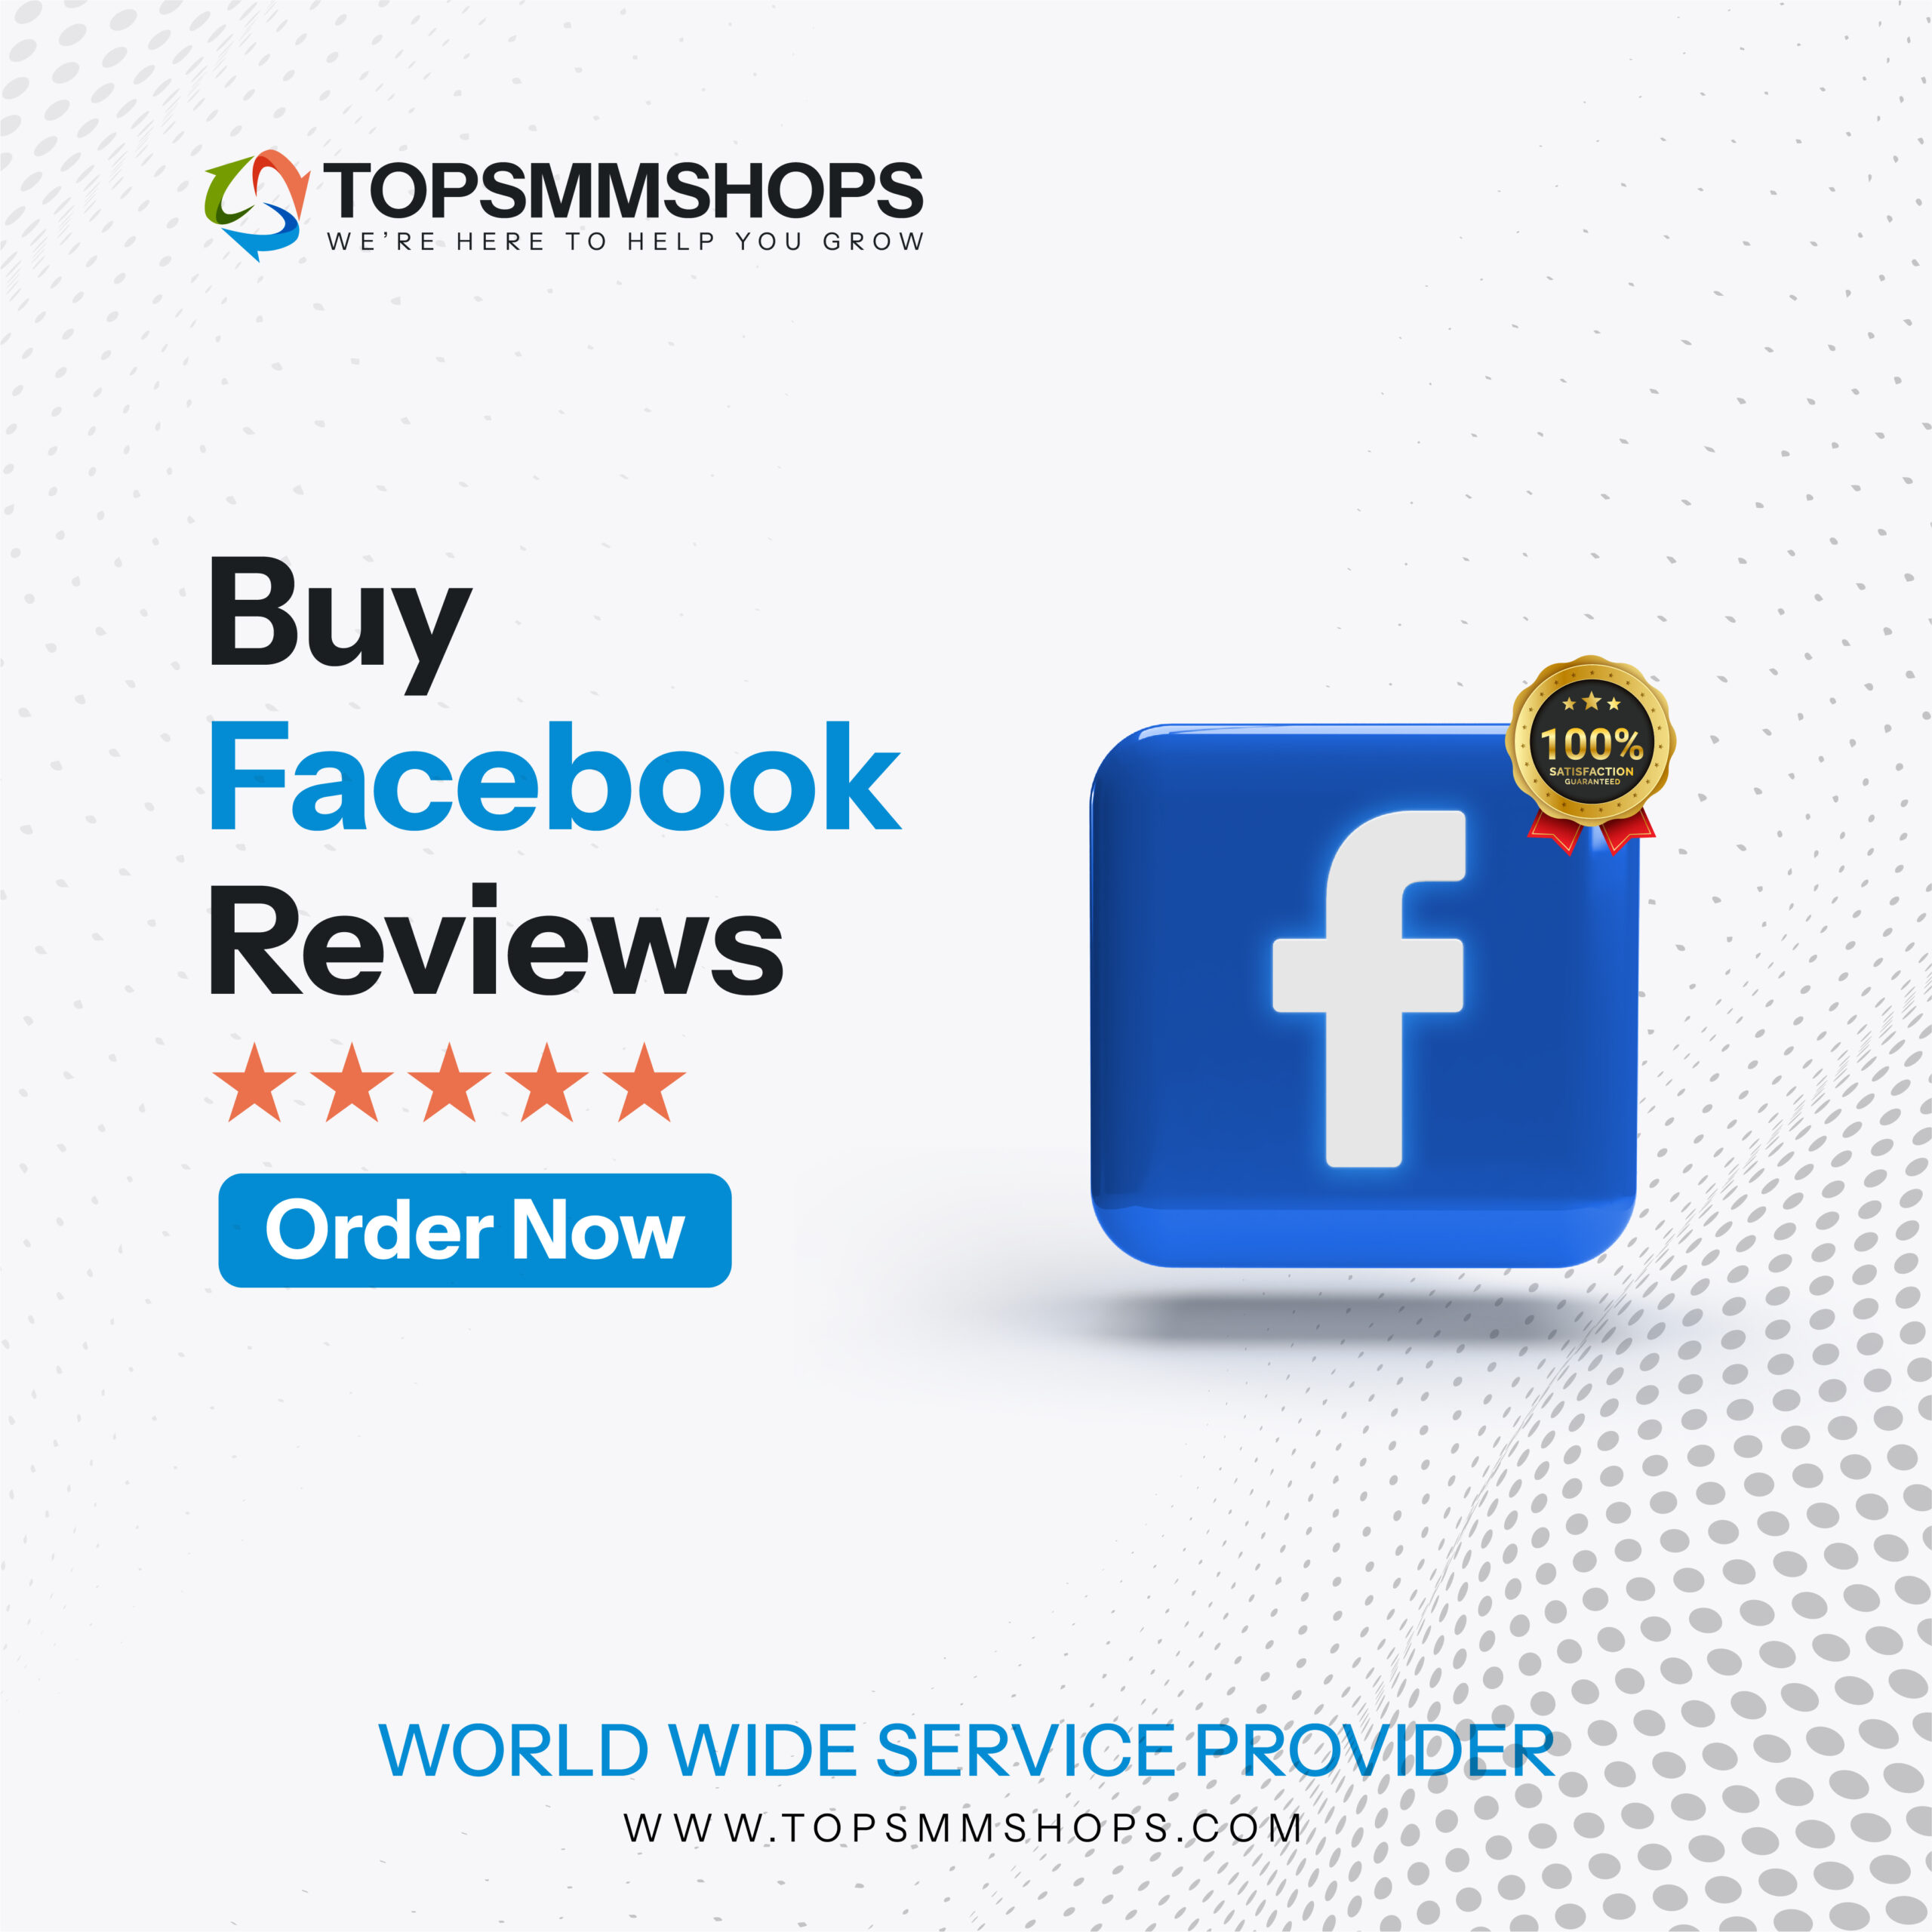 Buy Facebook Reviews - 5 Star Rating for your Pages...